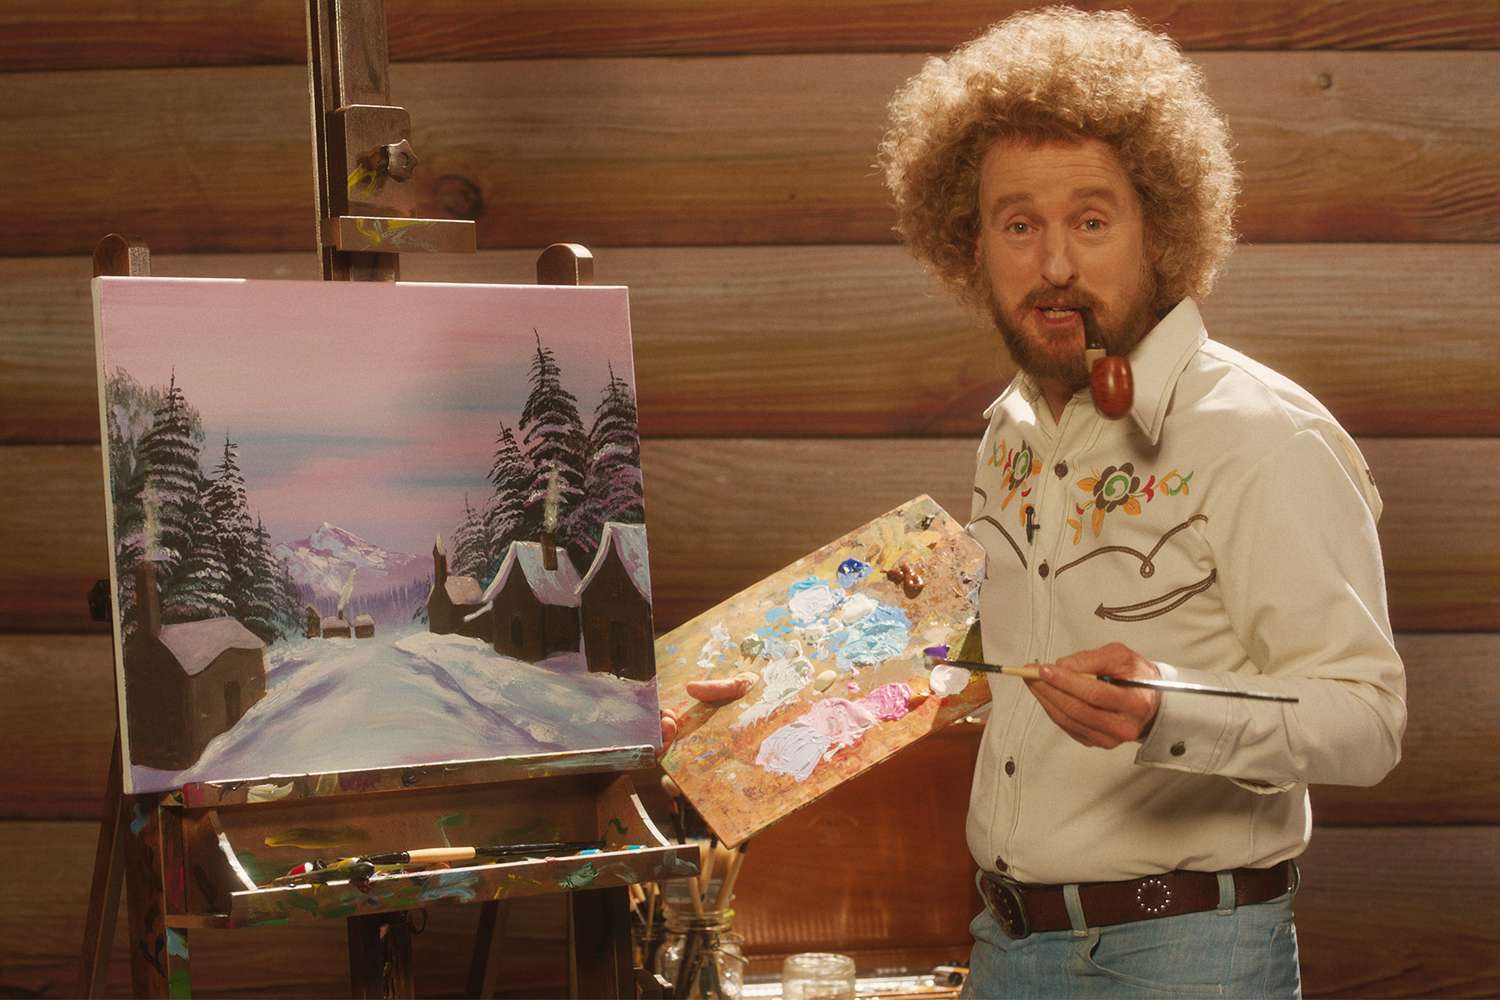 ‘Paint’ star Owen Wilson on taking Bob Ross art classes and that permed wig